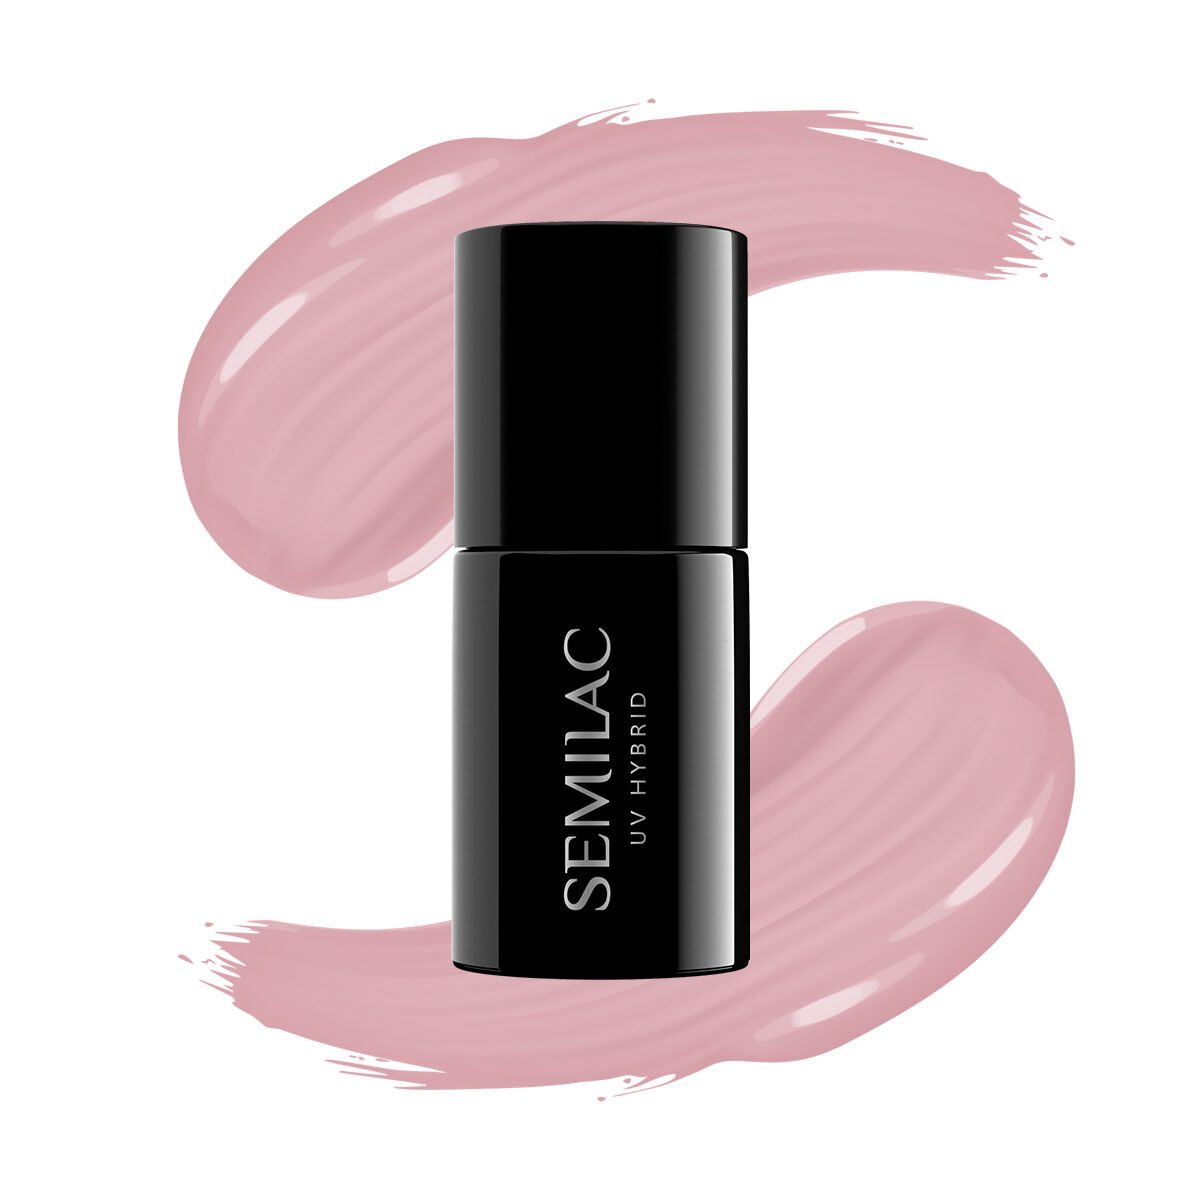 SEMILAC Extend 5in1 - 7 ml - No. 802 Dirty Nude Rose